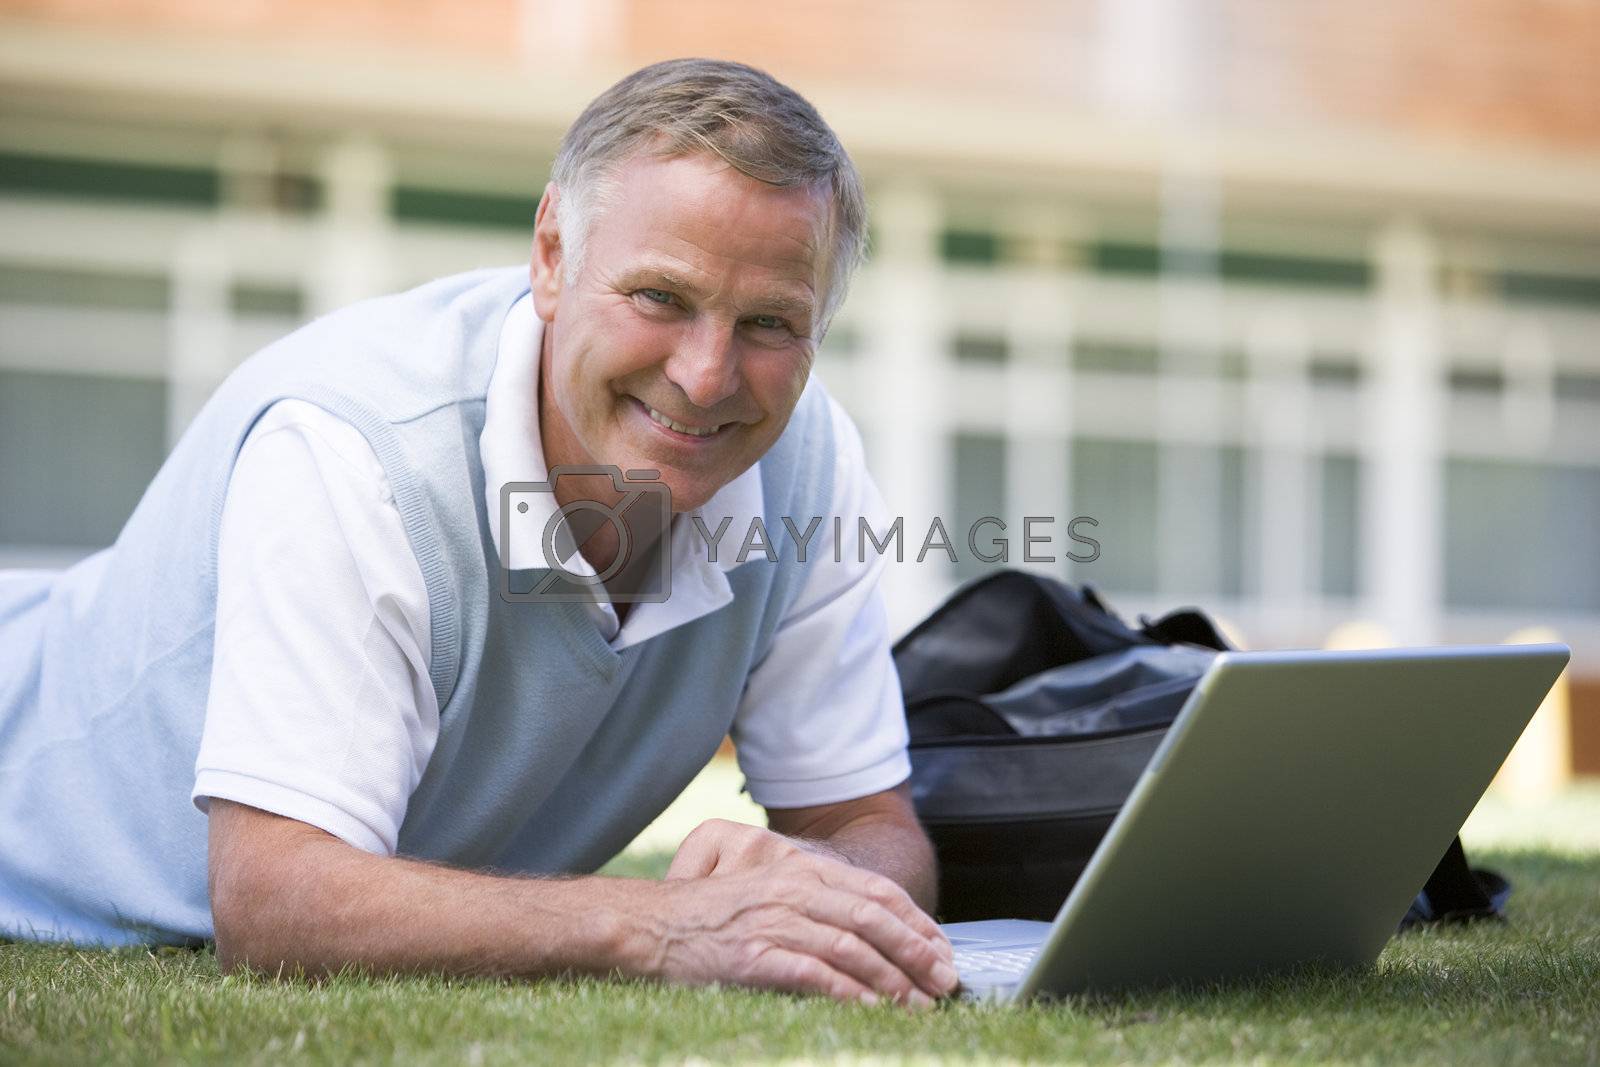 Royalty free image of Man lying on lawn of school with laptop by MonkeyBusiness